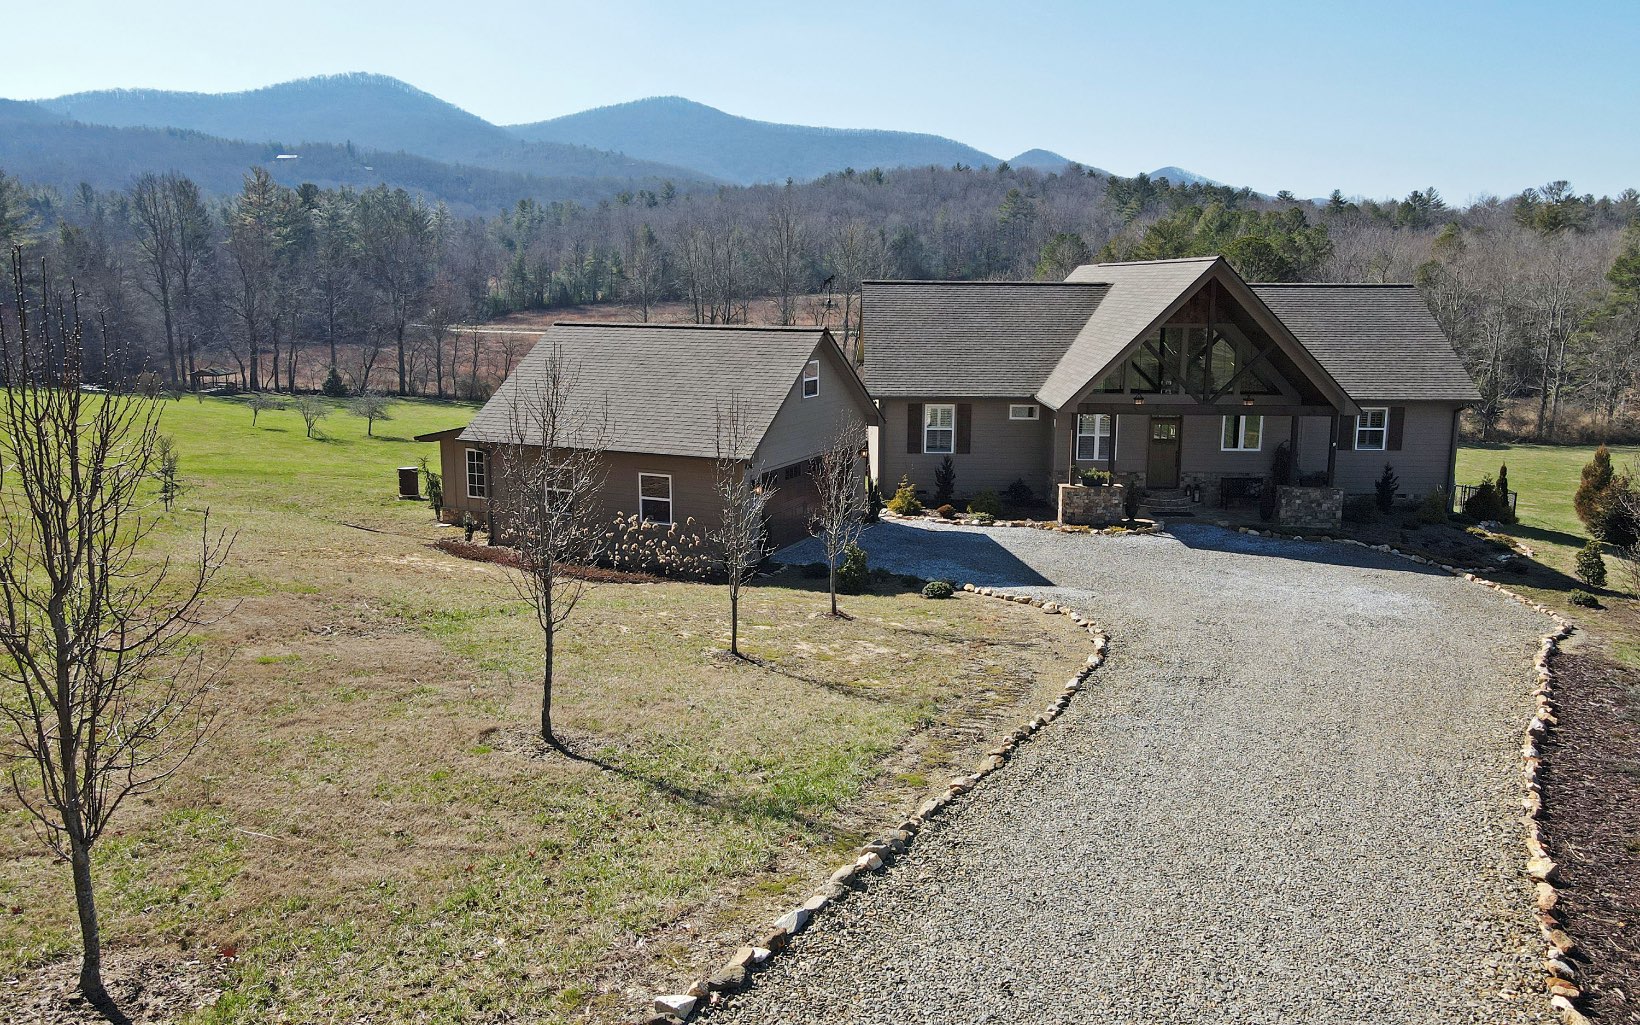 Hello Country Living! Stunning Mountain Views, Pasture & Creek Front! Mini-Farm Potential! 4 Acres on Little Young Cane Creek! 2019 Build, One Owner, One Level Ranch Living: 3 Bedrooms, 2 Baths. Open Living: Gorgeous Kitchen with Leathered Granite, Custom Cabinetry & SS Appliances! Dining Area. Dual-Sided Stone & Gas Log Fireplace. Fabulous Great-Room with Hardwood Floors Throughout, Vaulted Ceilings & Sweeping VIEWS. Wood Ceilings in Bedrooms + Tiled Showers. Enjoy All 4-Seasons on the Covered Back-Deck w/ the Unbelievable Mtn Views & ALL without the Steep & Winding Roads! HardiBoard Siding, 2 Car Detached Garage w/ Storage Bonus Room Above + Gardening She-Shed! Fenced Backyard for your Fur Babies or Kiddos! Sensible Restrictions to Protect your Investment! FINALLY: Plenty of Room to Park an RV, you just need to Enclose it! Nice Privacy Buffer.